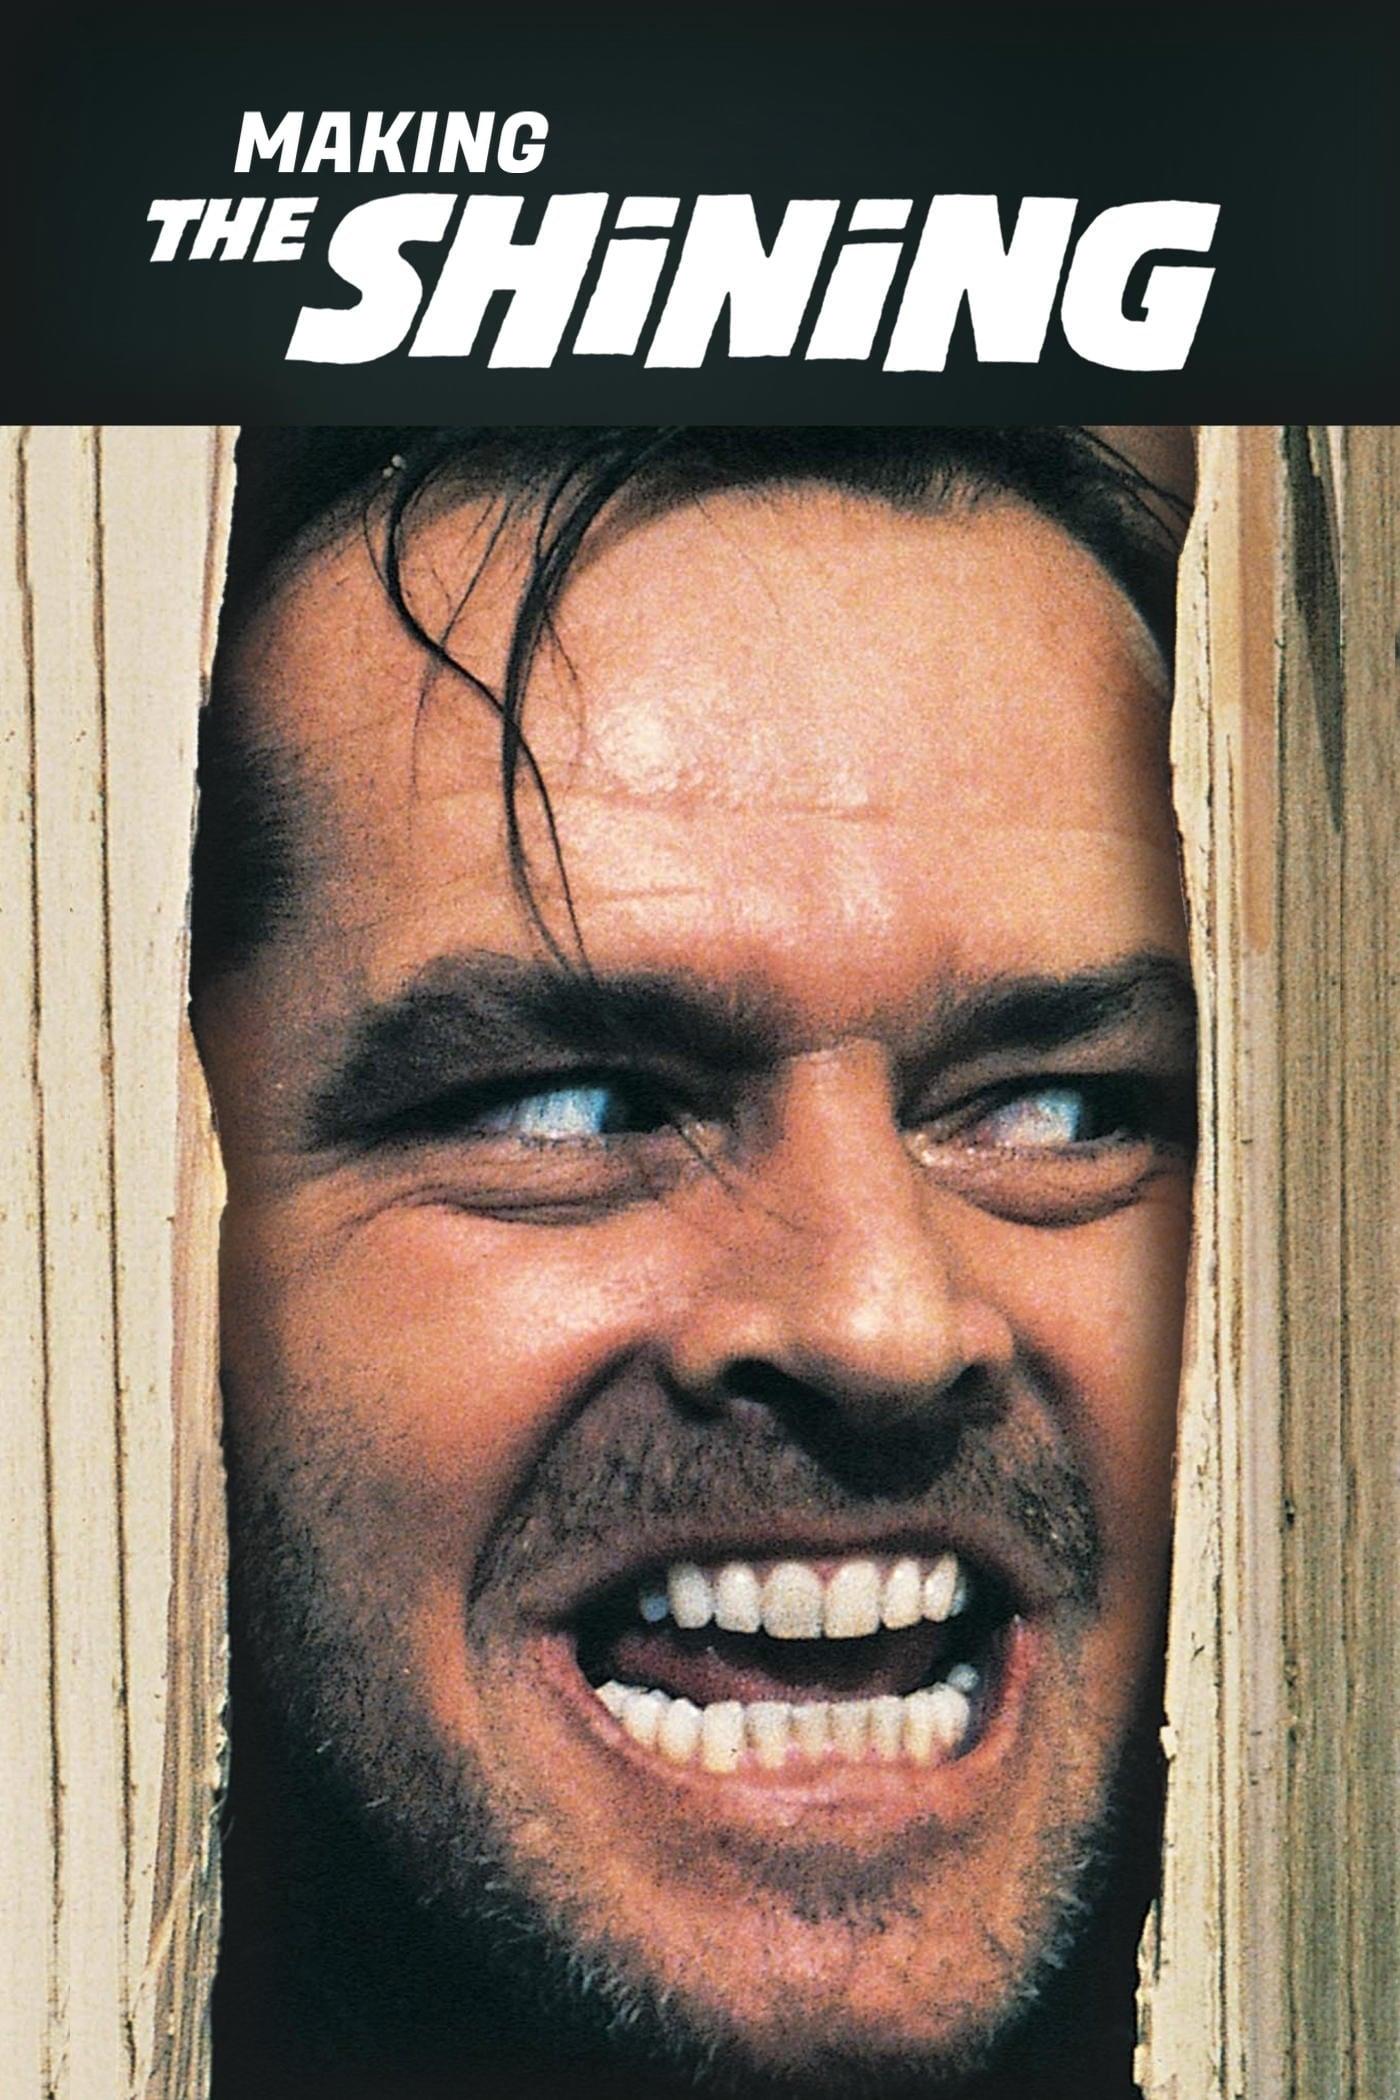 Making 'The Shining' poster